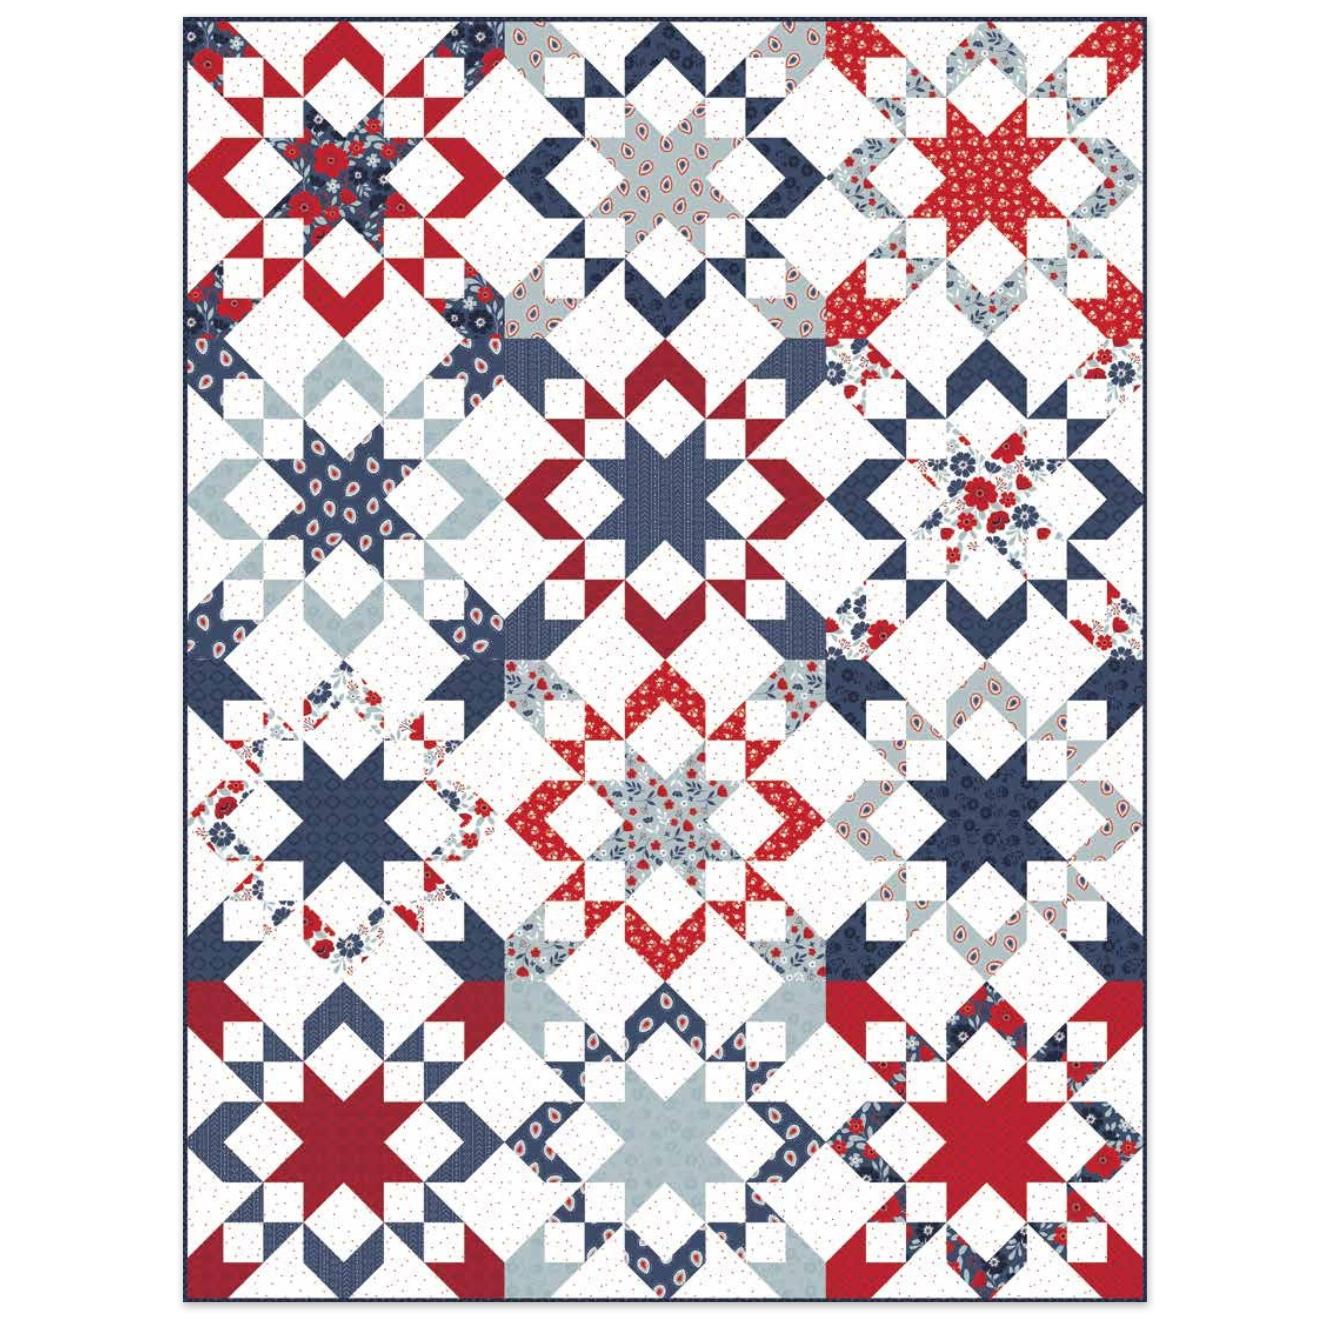 American Beauty Starly Quilt Kit